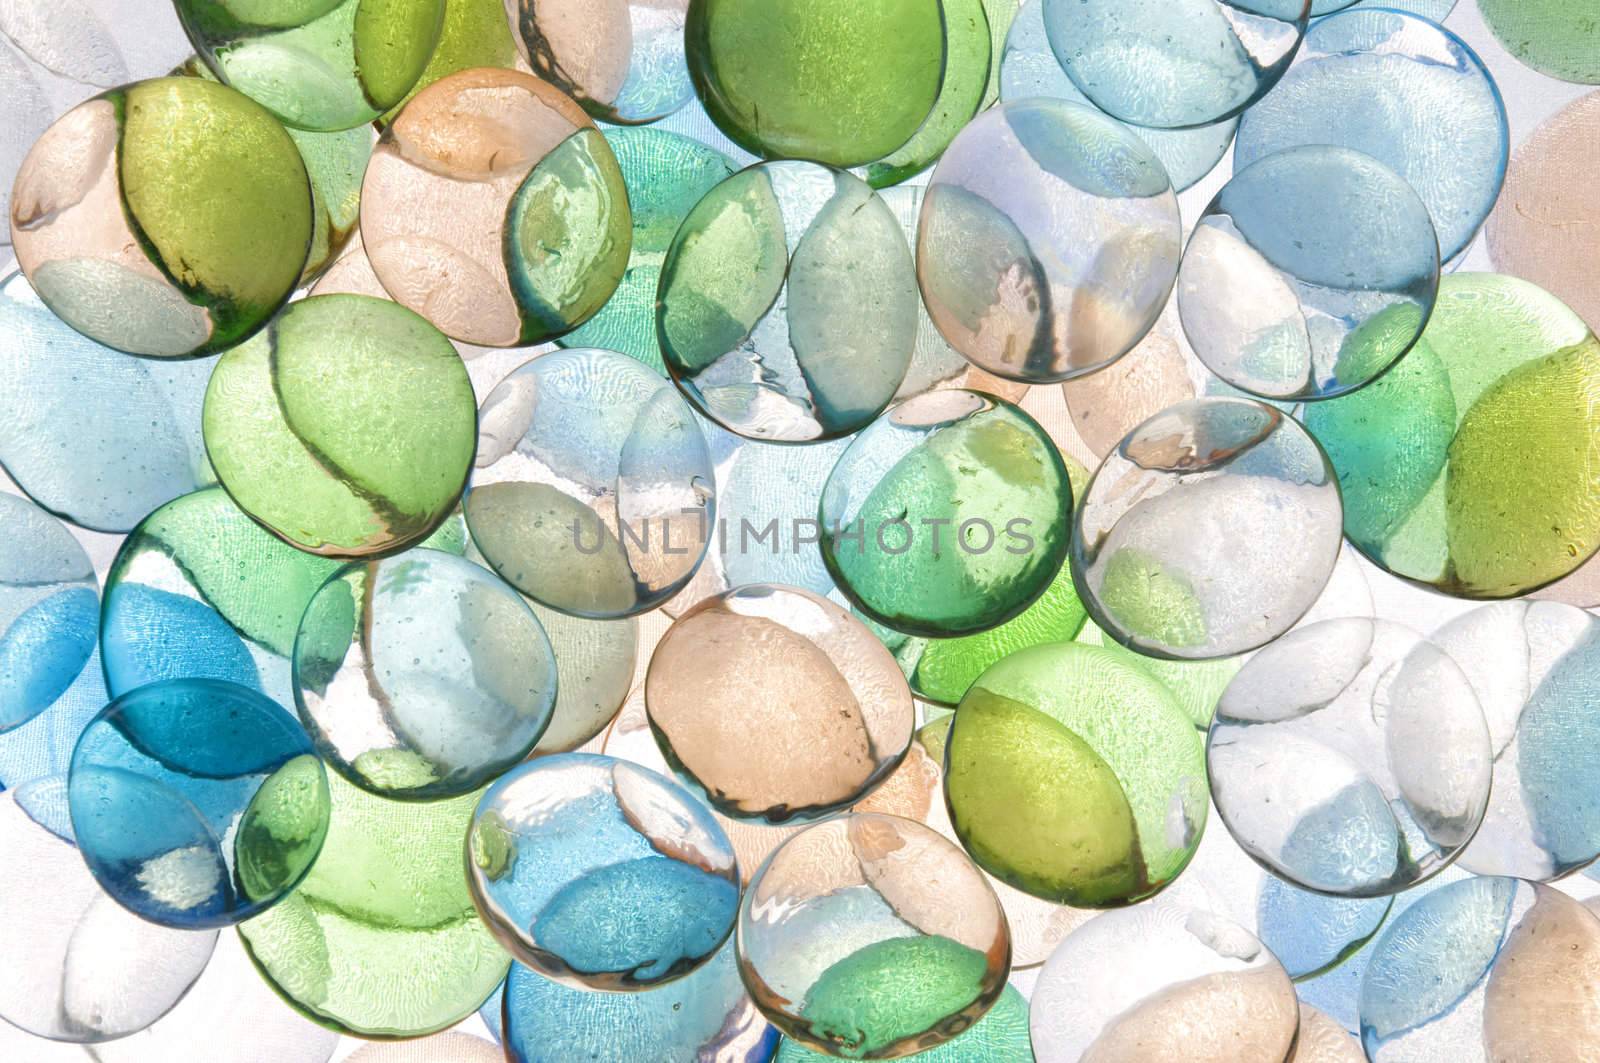 colorful background texture of backlite glass stones of different sizes